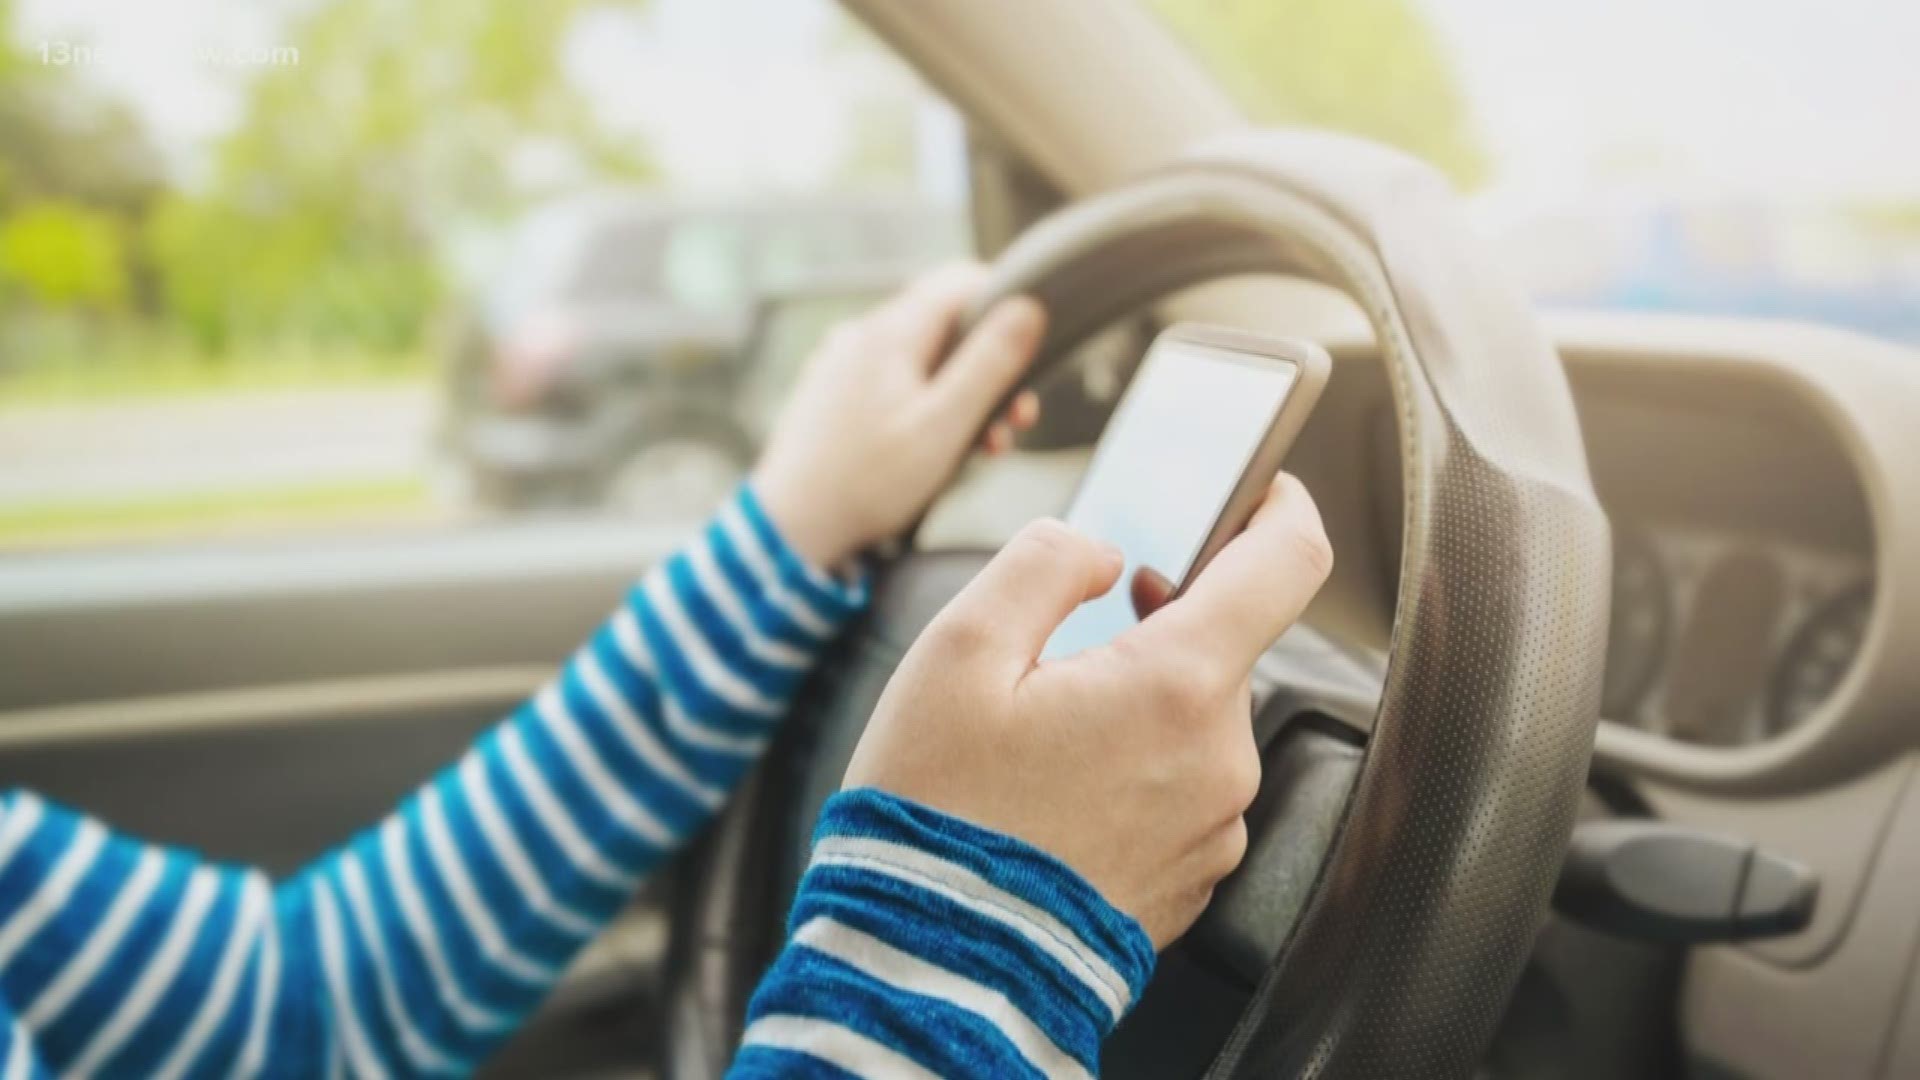 Governor Ralph Northam wants to make roads across Virginia safer with a new ban on holding cell phones while driving.